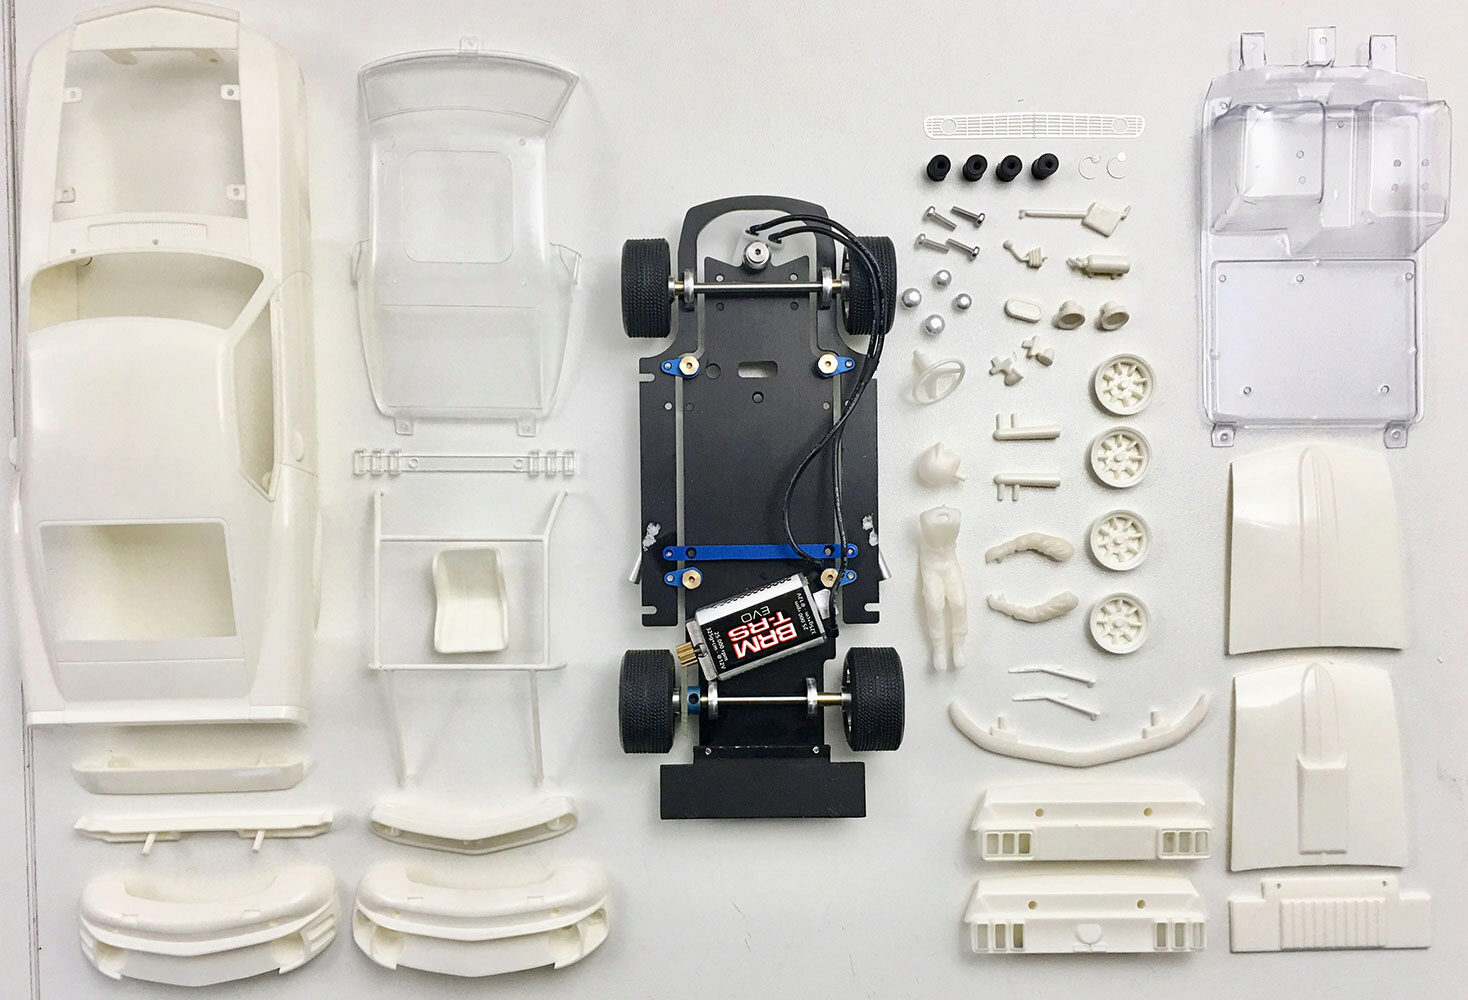 BRM MODEL CARS BRM078 MUSTANG BOSS 302 1969-70 - Full White Kit - preassembled chassis